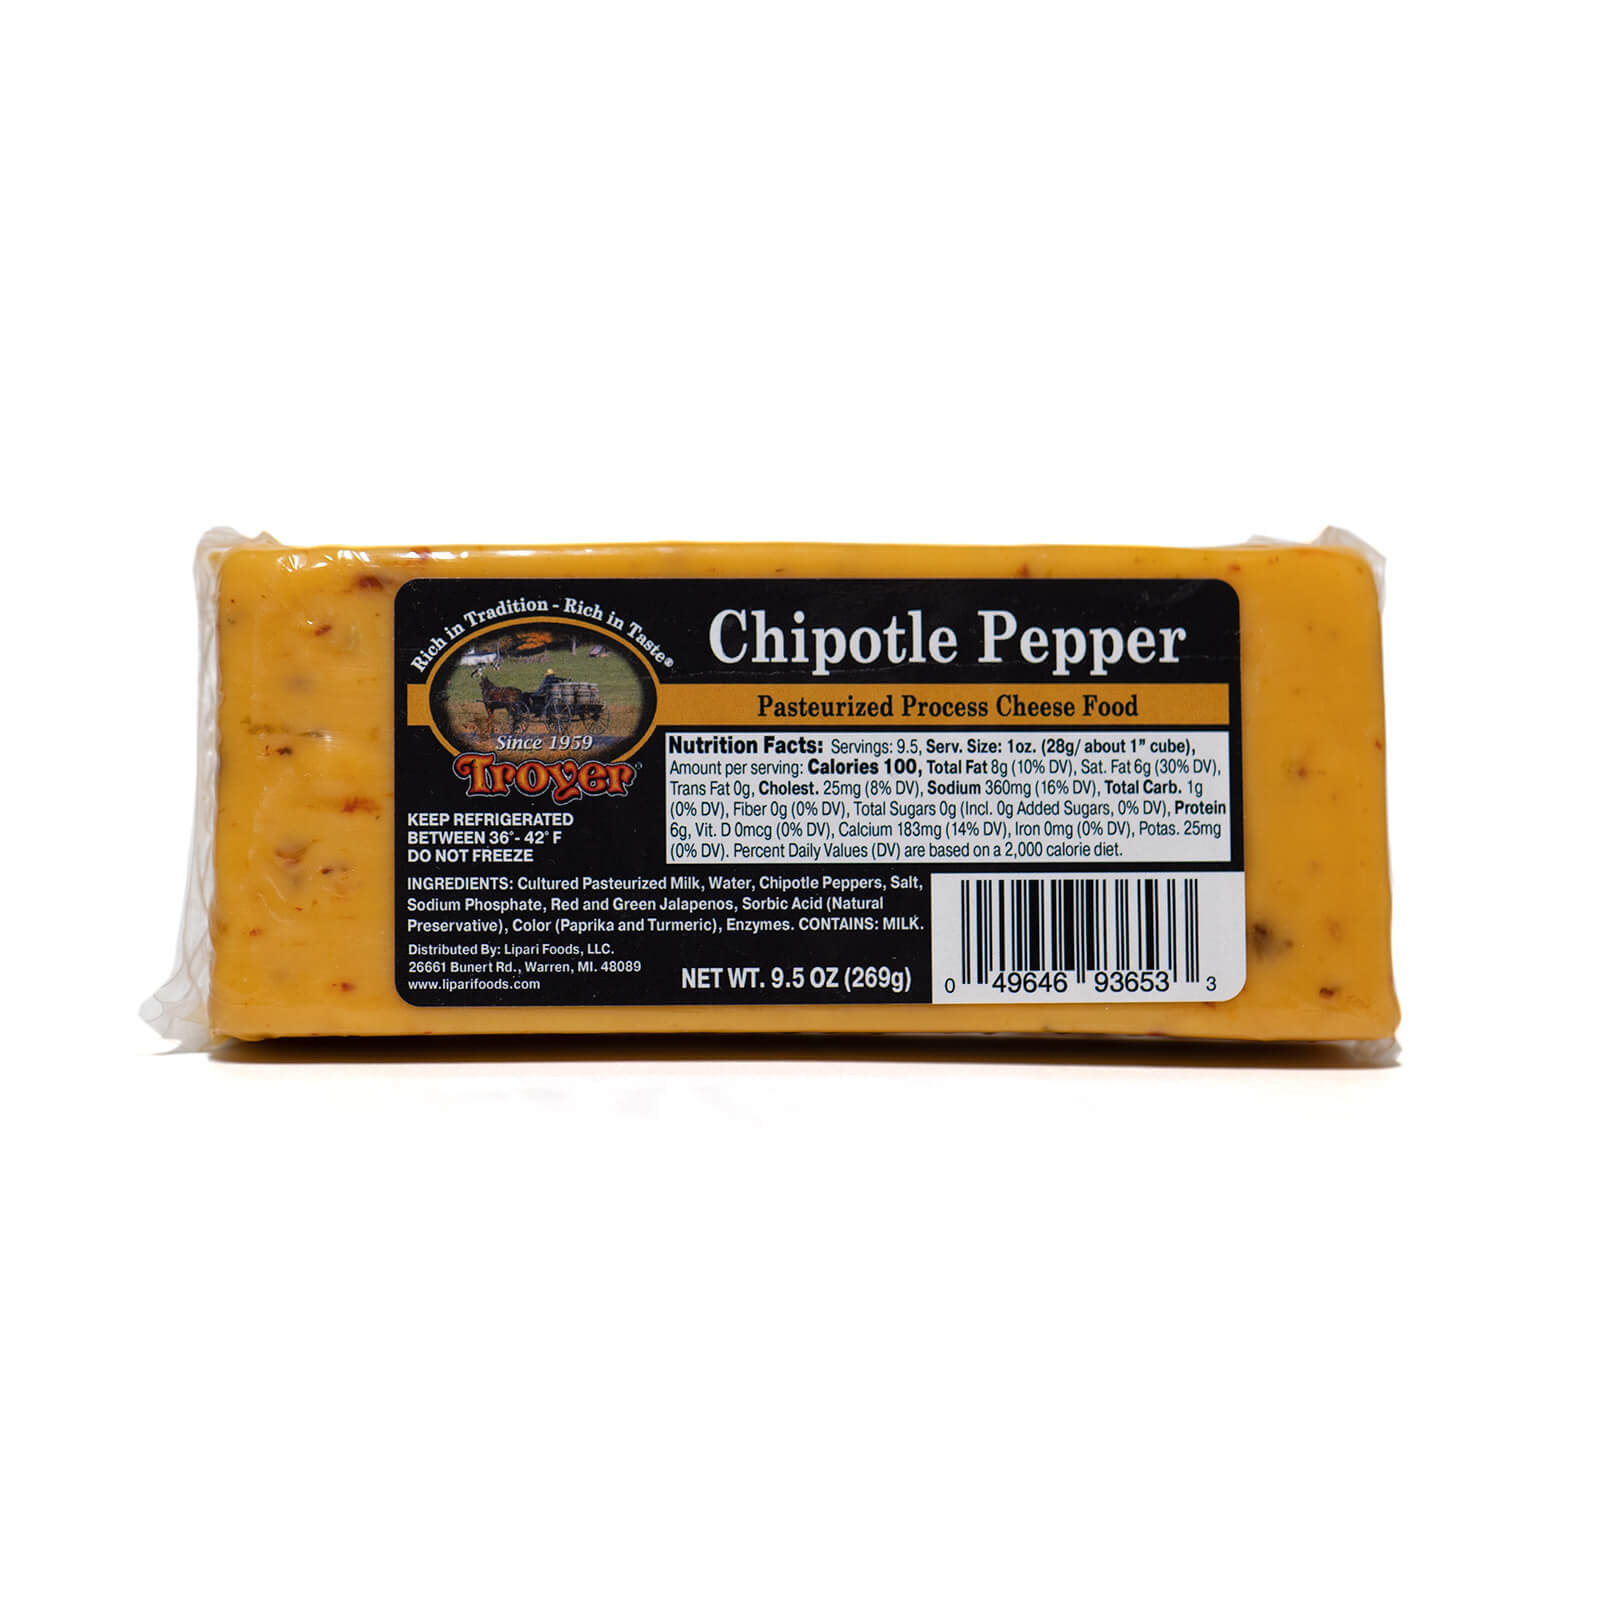 Chipotle Pepper Cheese - Troyer - 9.5oz w/ Nutrition Facts